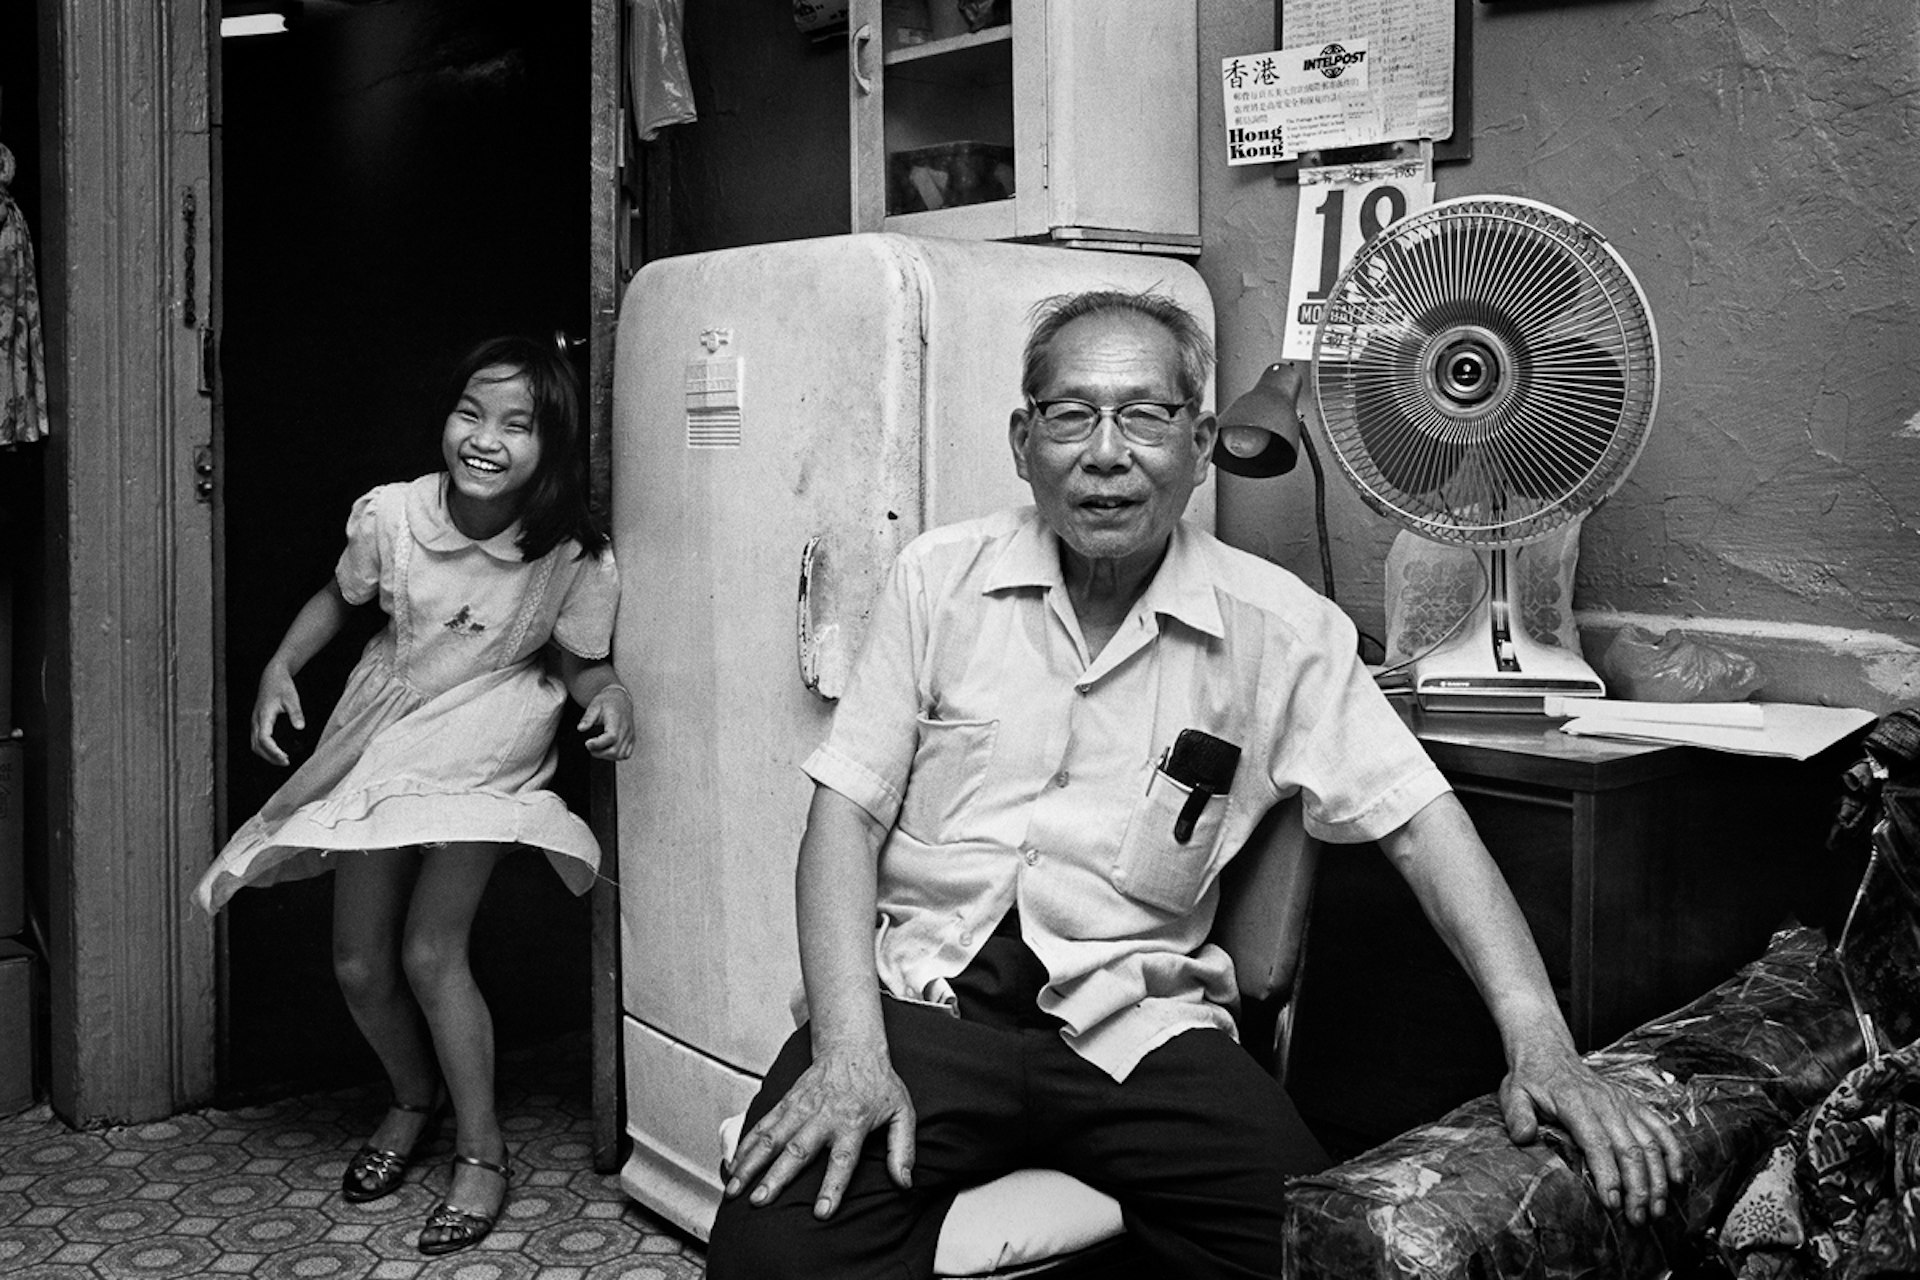 A tender portrait of Chinatown New York in the 1980s